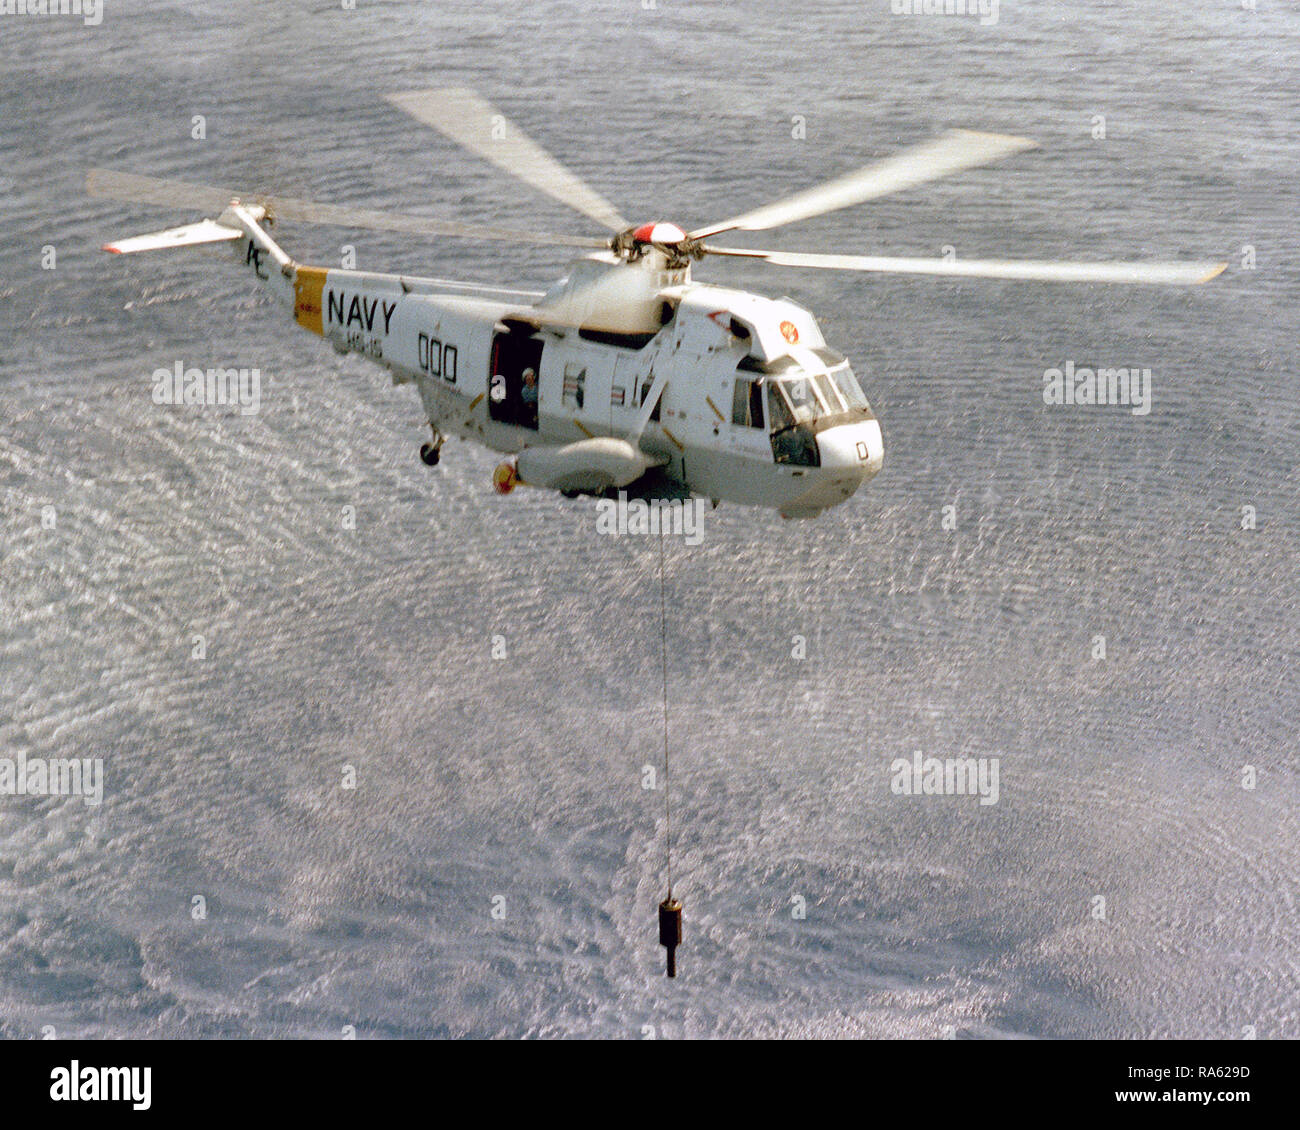 1979 - A right front view of an SH-3 Sea King helicopter from Helicopter Antisubmarine Squadron 15 (HS-15) as it lowers a sonar probe to the water's surface. Stock Photo